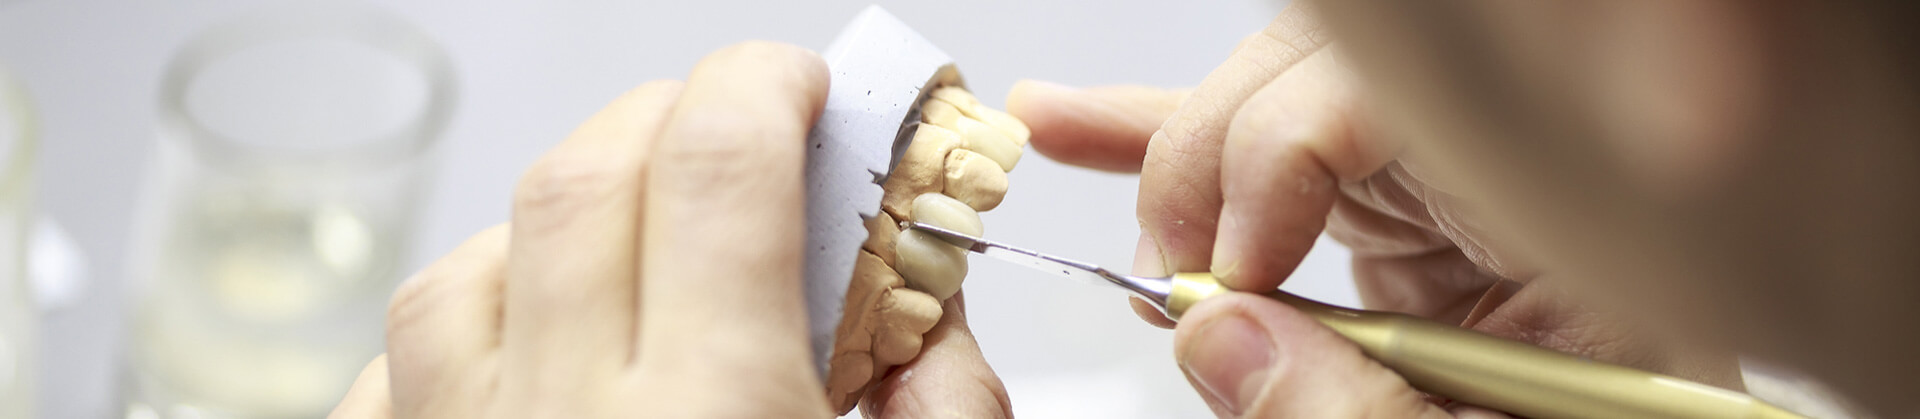 Closeup of dental prosthetic being examined